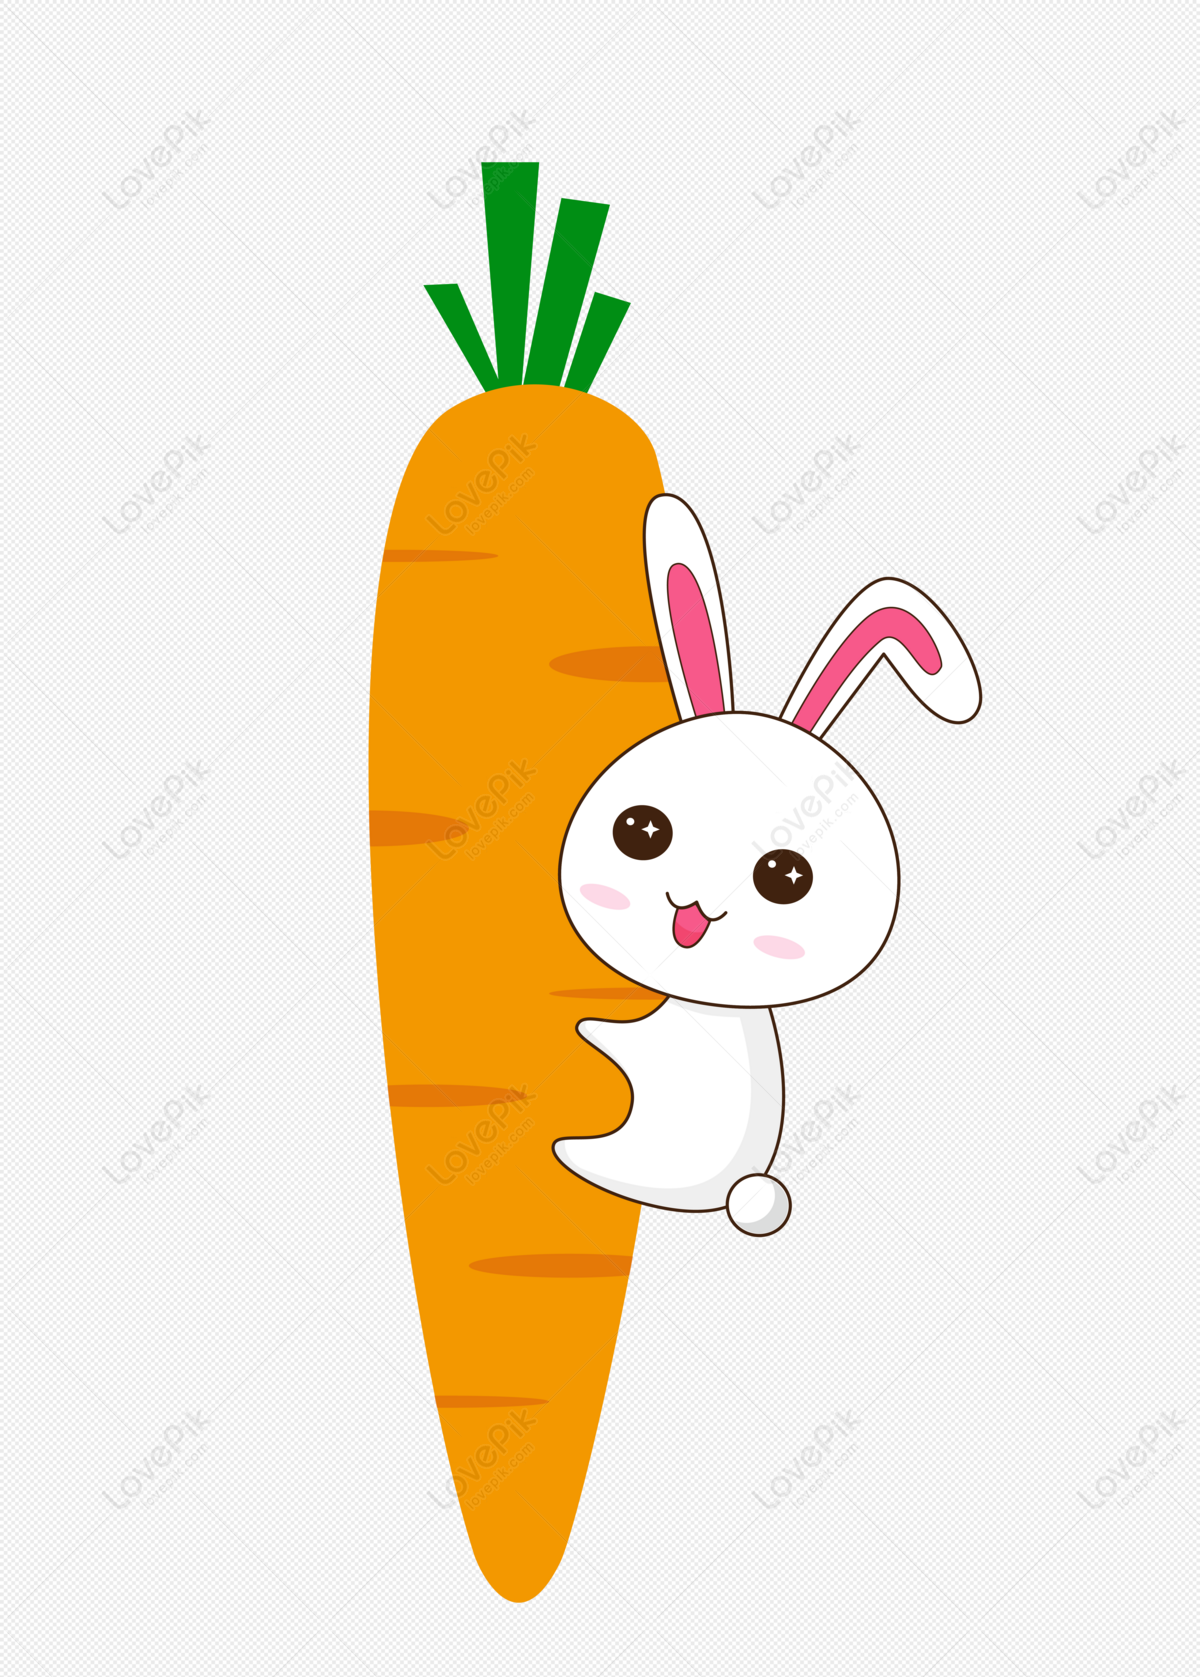 Rabbit Carrot Free PNG And Clipart Image For Free Download - Lovepik |  401368399